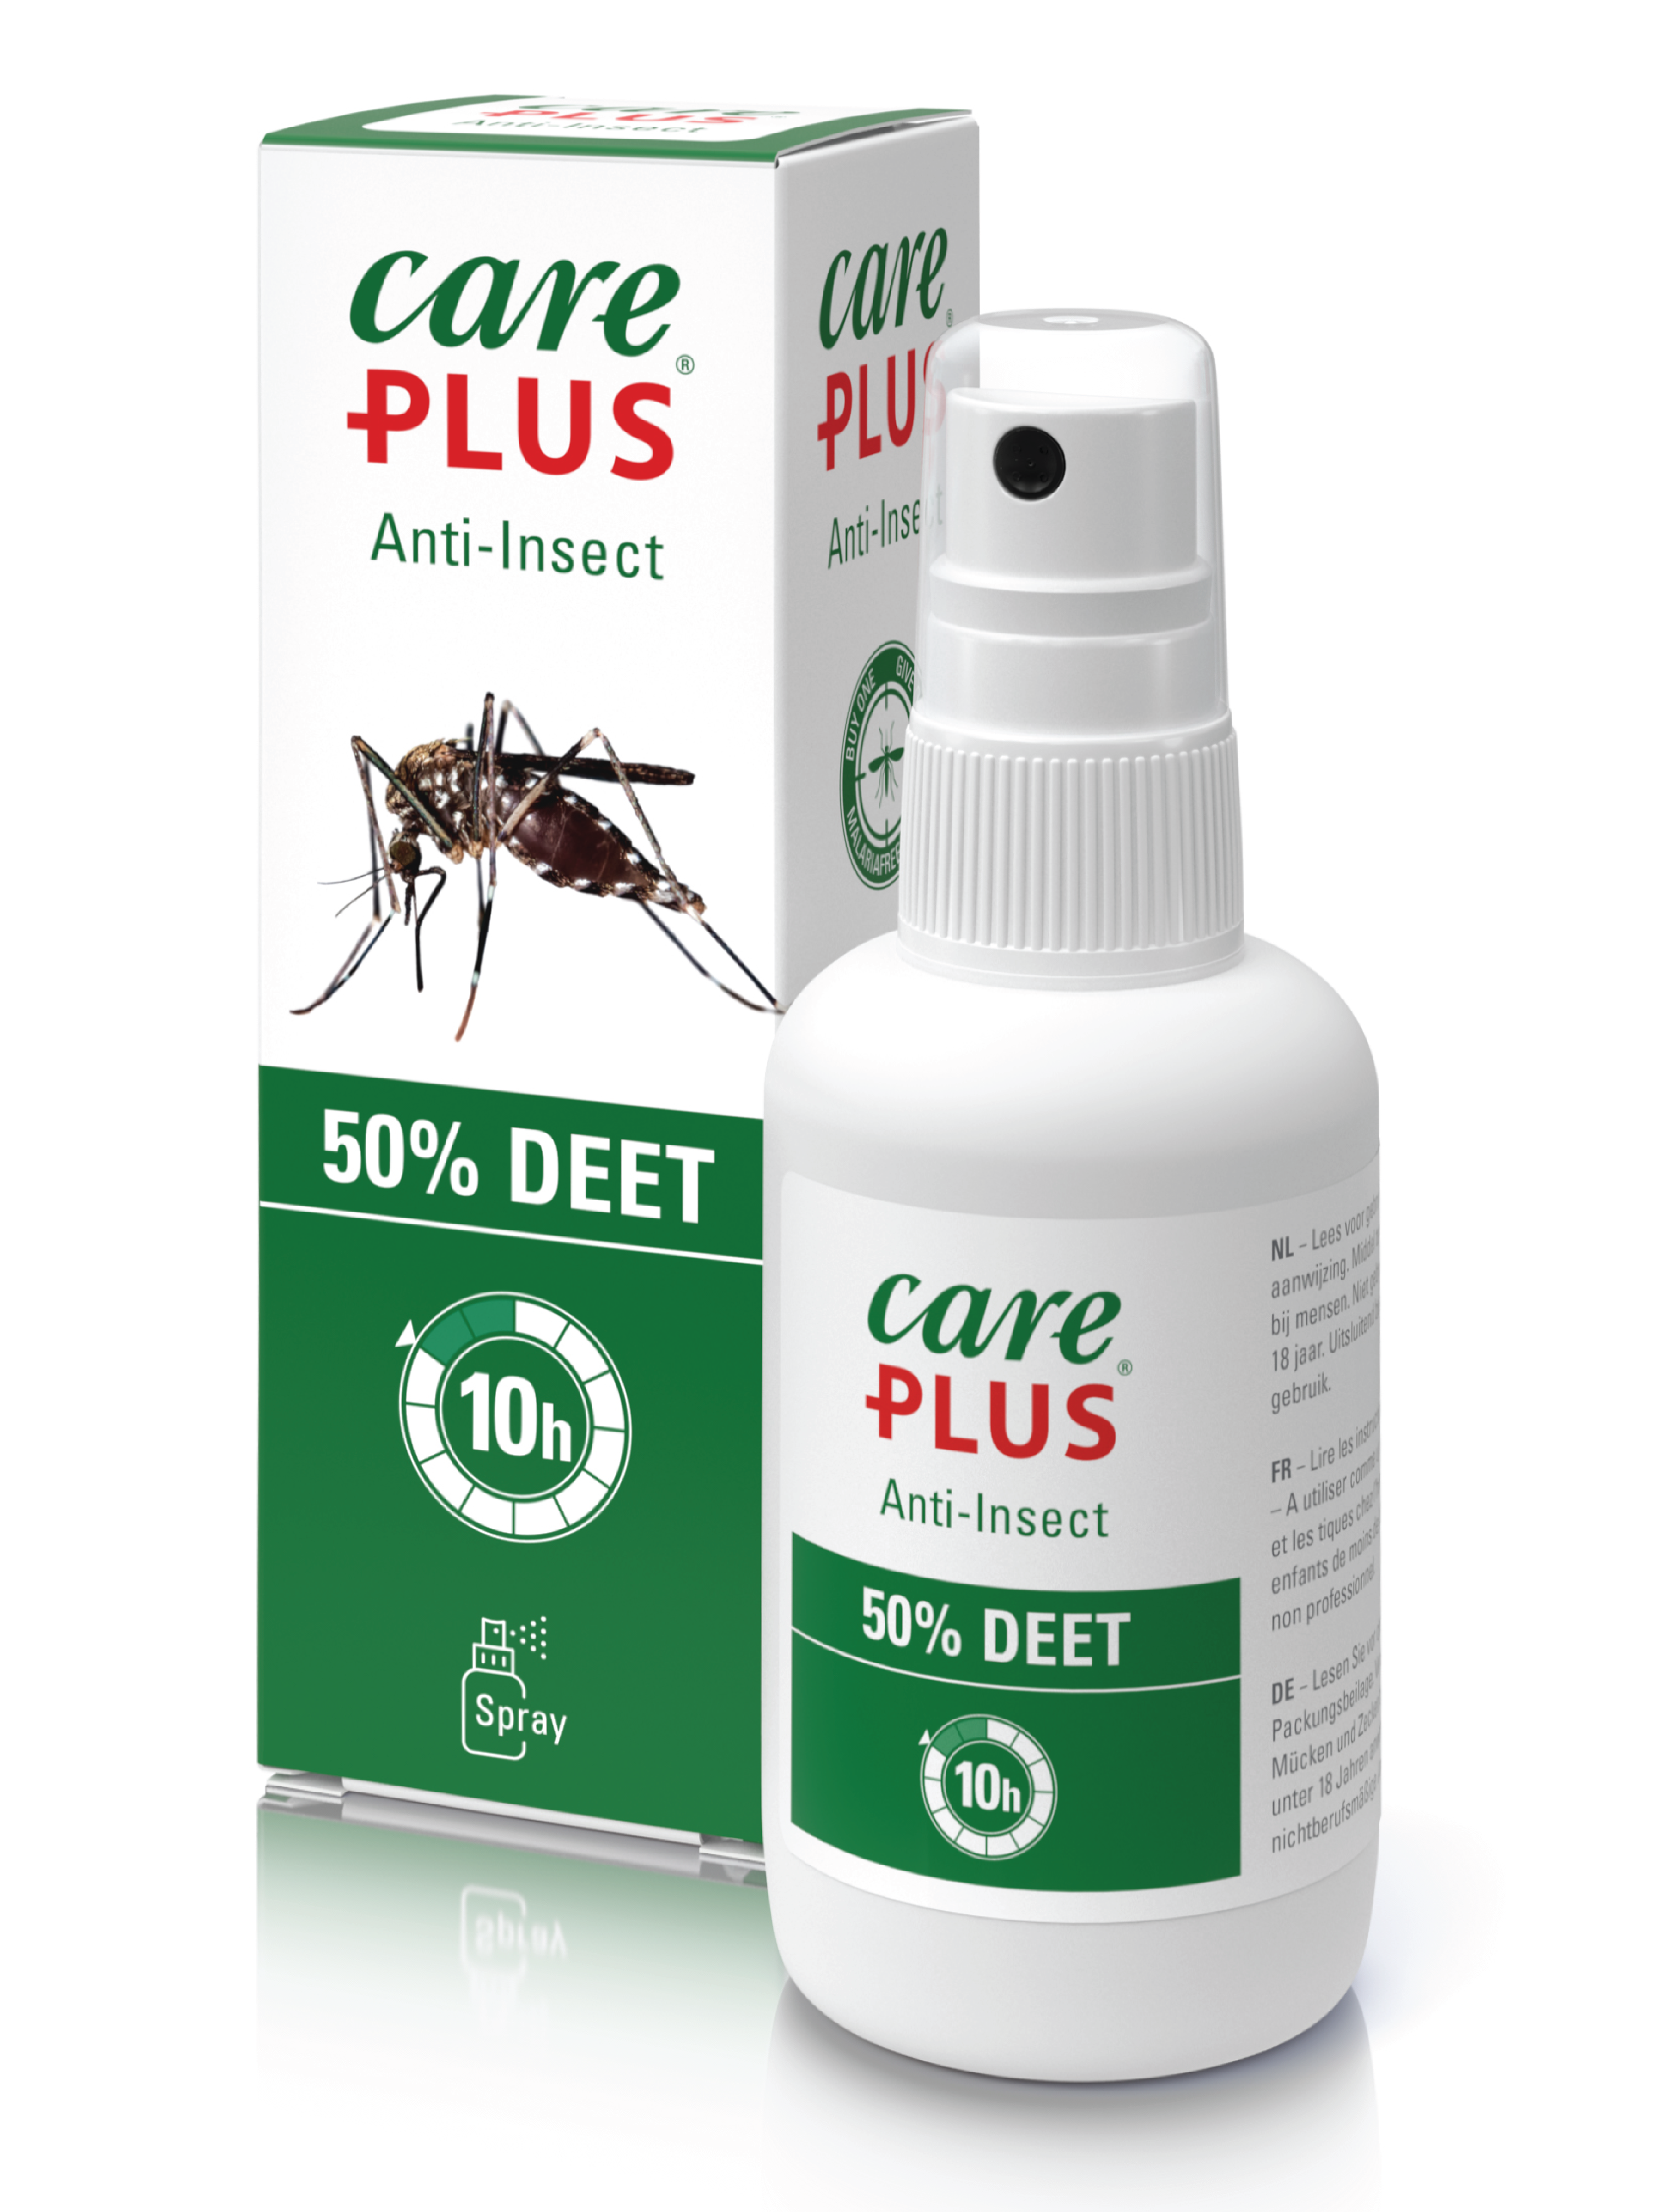 Care Plus Anti-Insect DEET 50%, spray, 60 ml